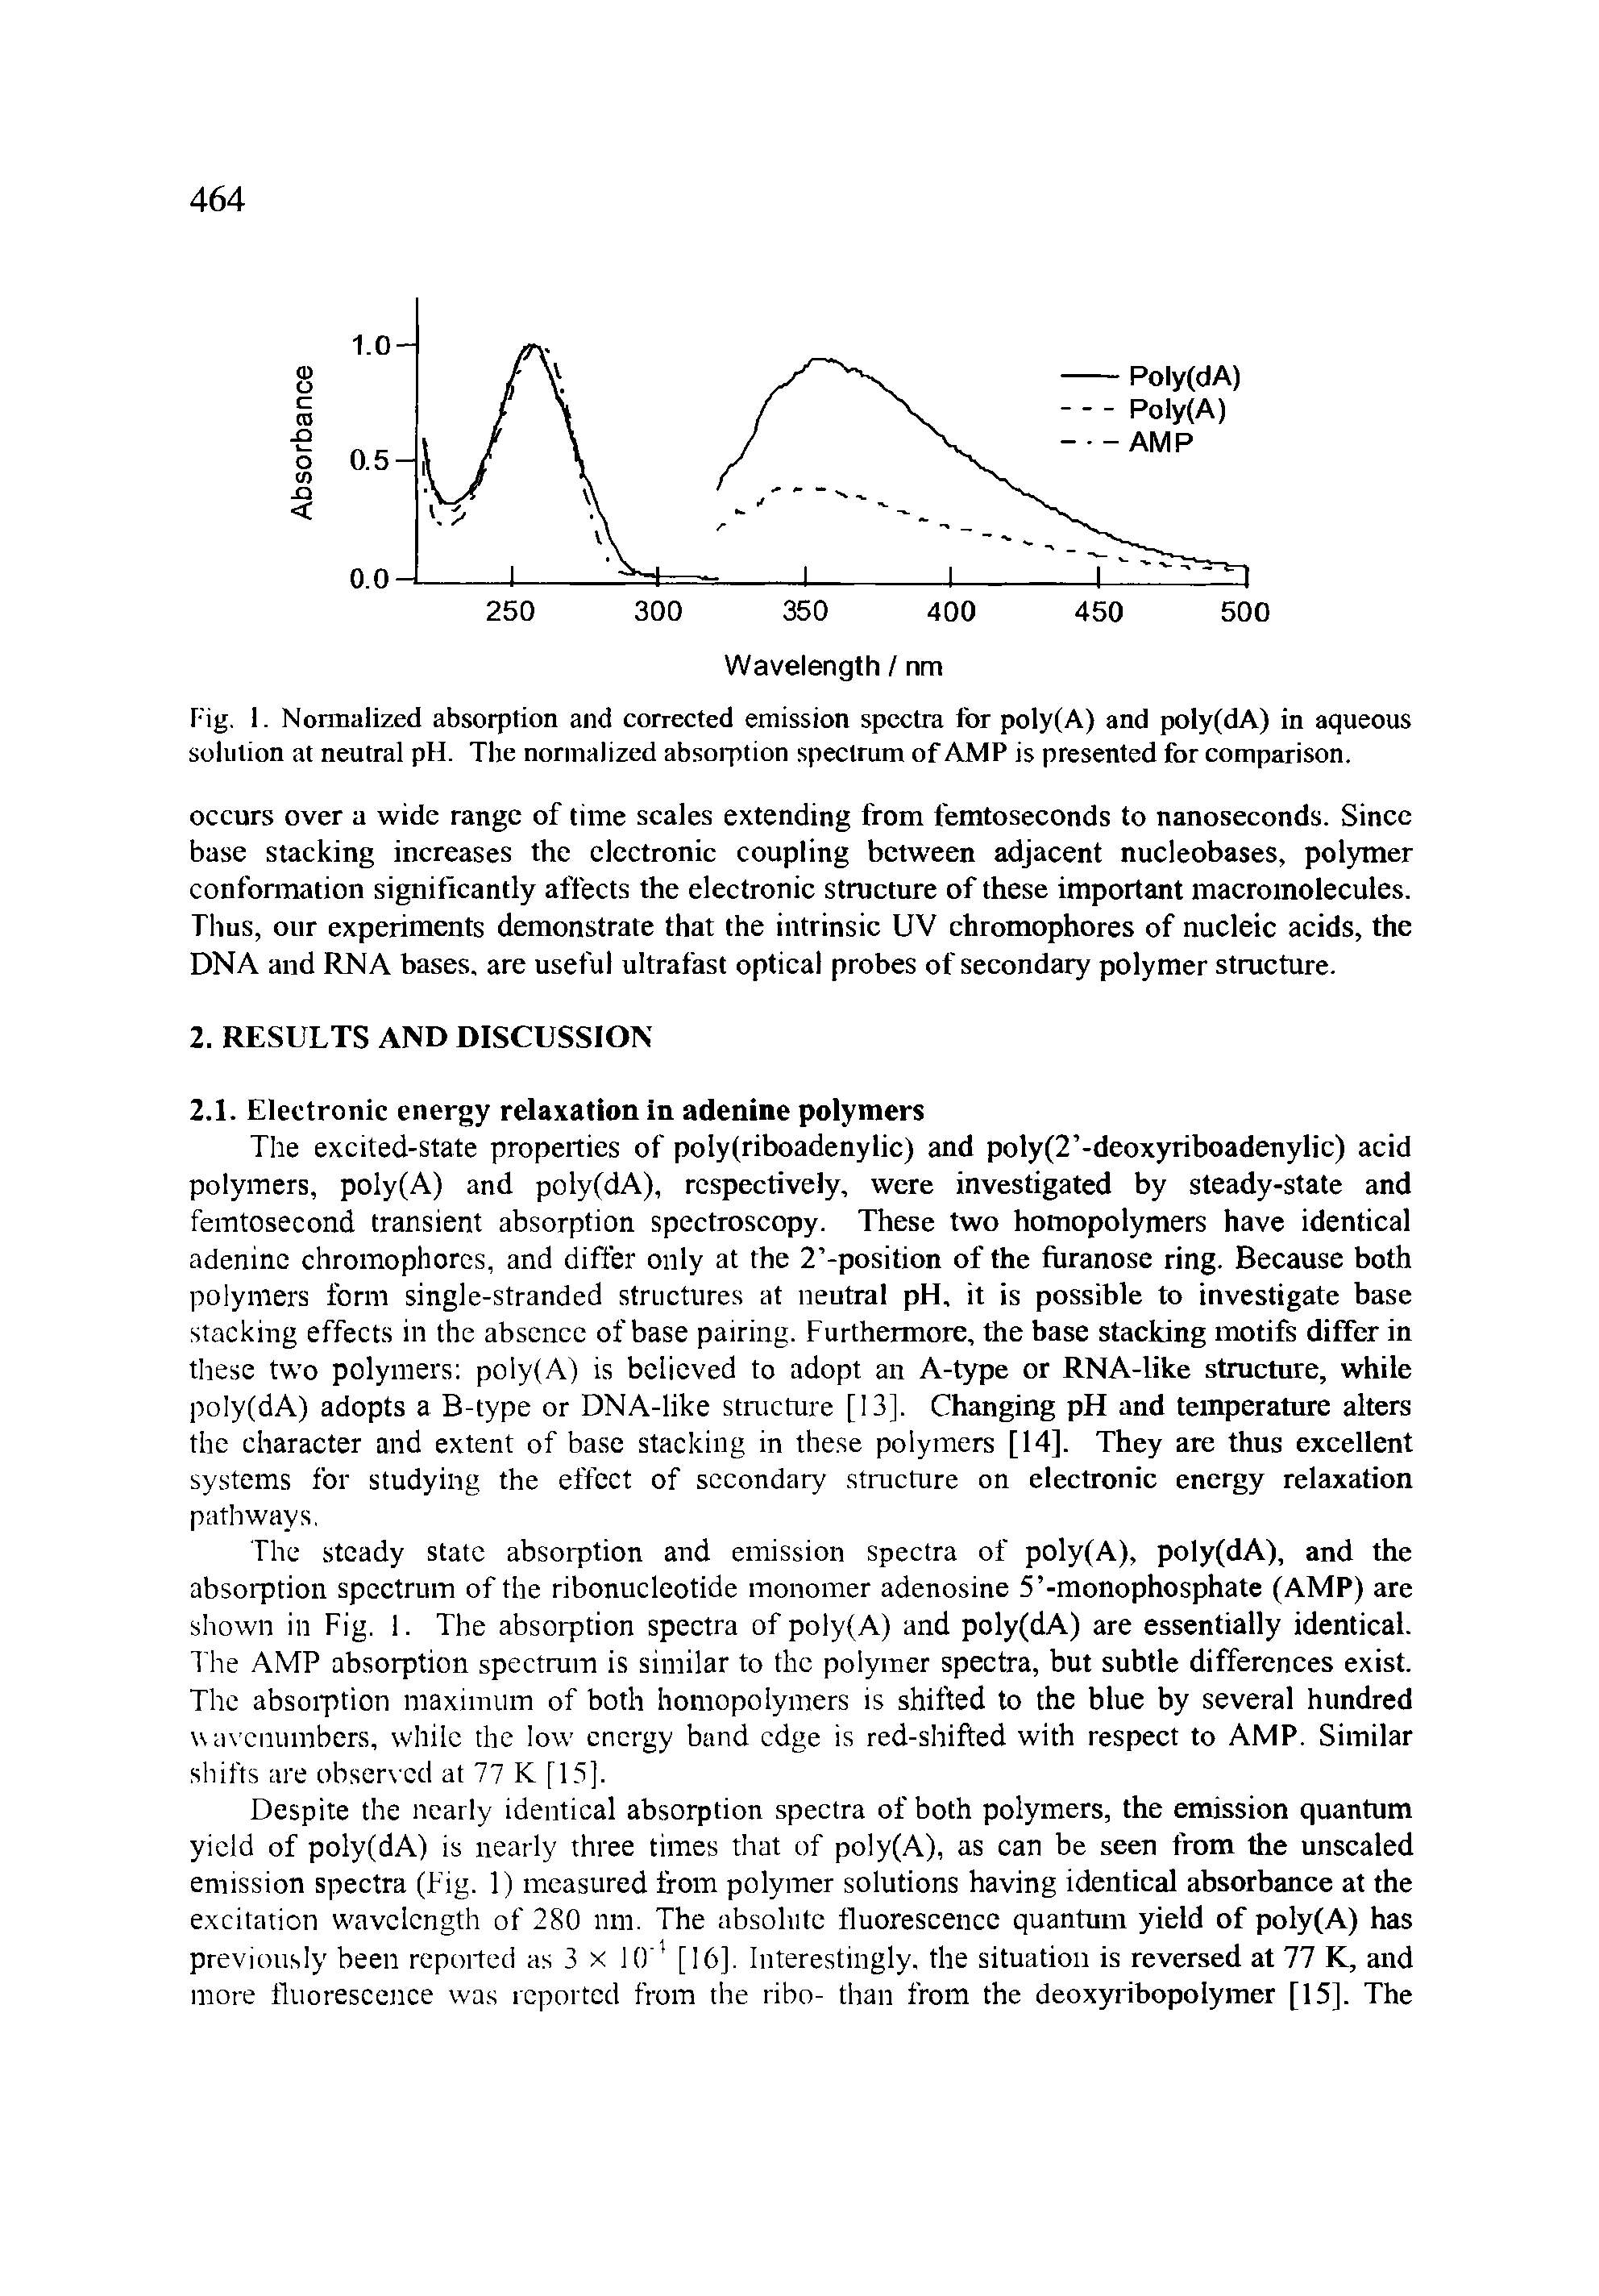 Fig. 1. Normalized absorption and corrected emission spectra for poly (A) and poly(dA) in aqueous solution at neutral pH. The normalized absorption spectrum of AMP is presented for comparison.